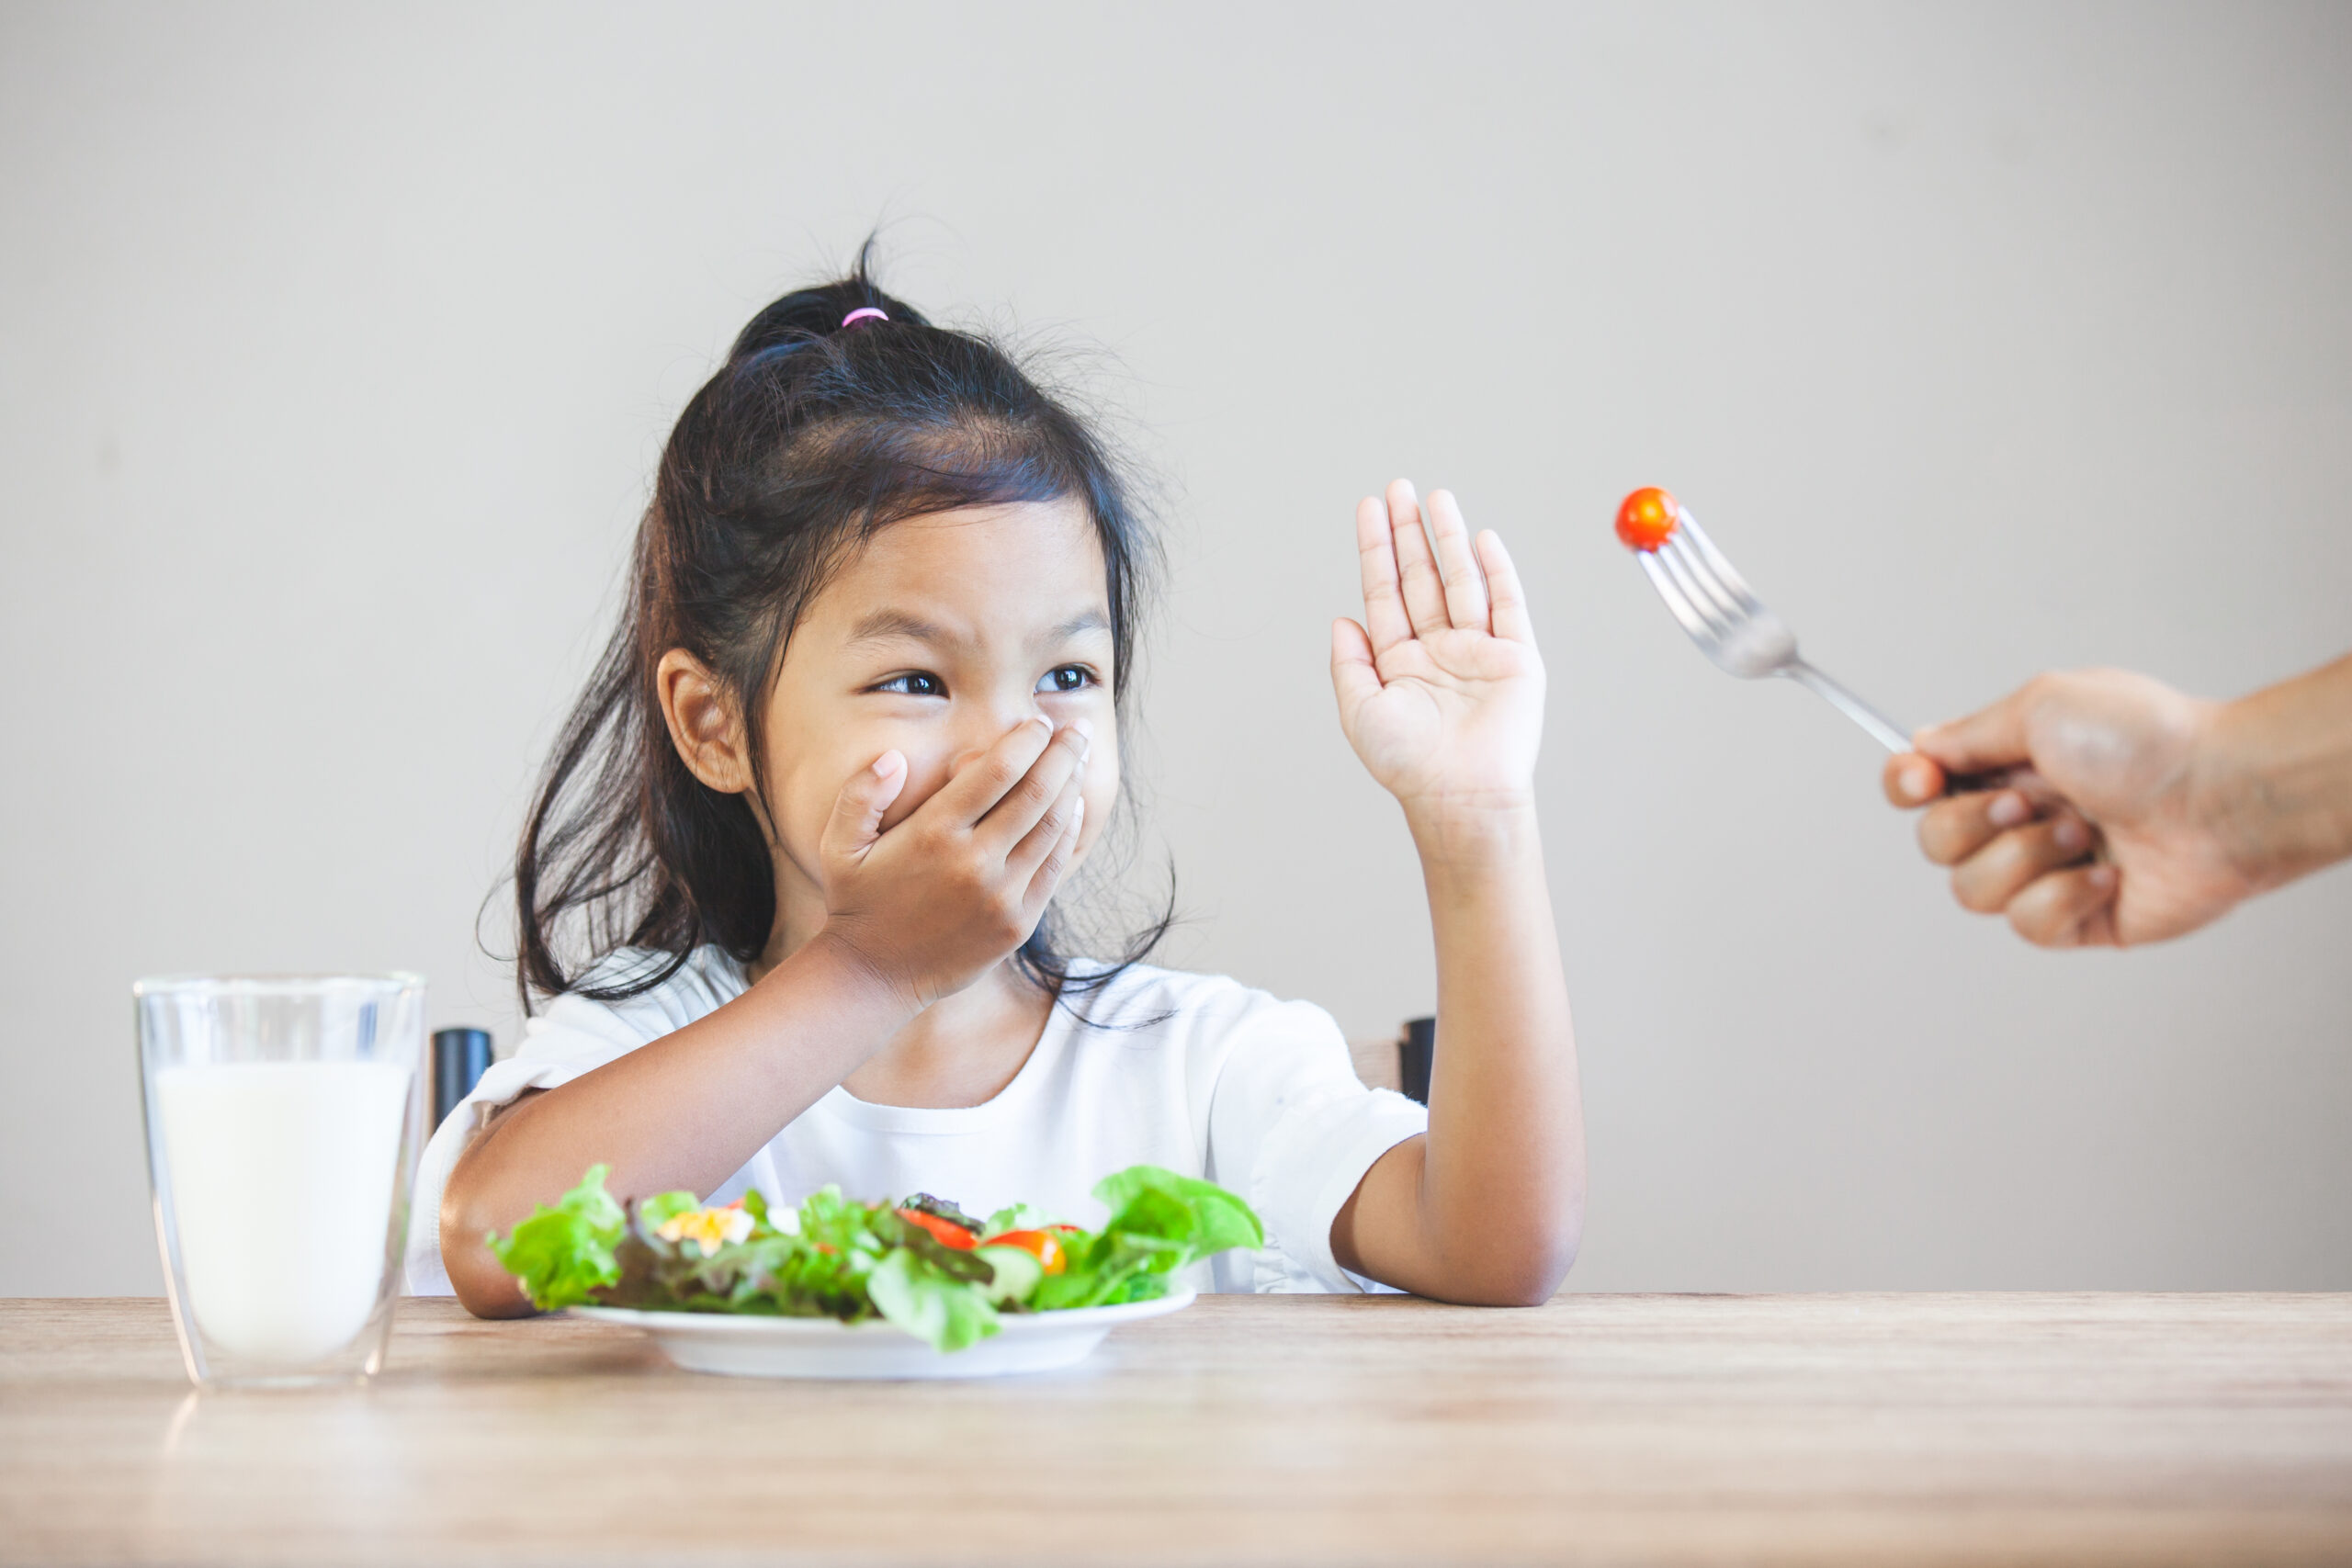 The Benefits of Building Healthy Eating Habits With Kids